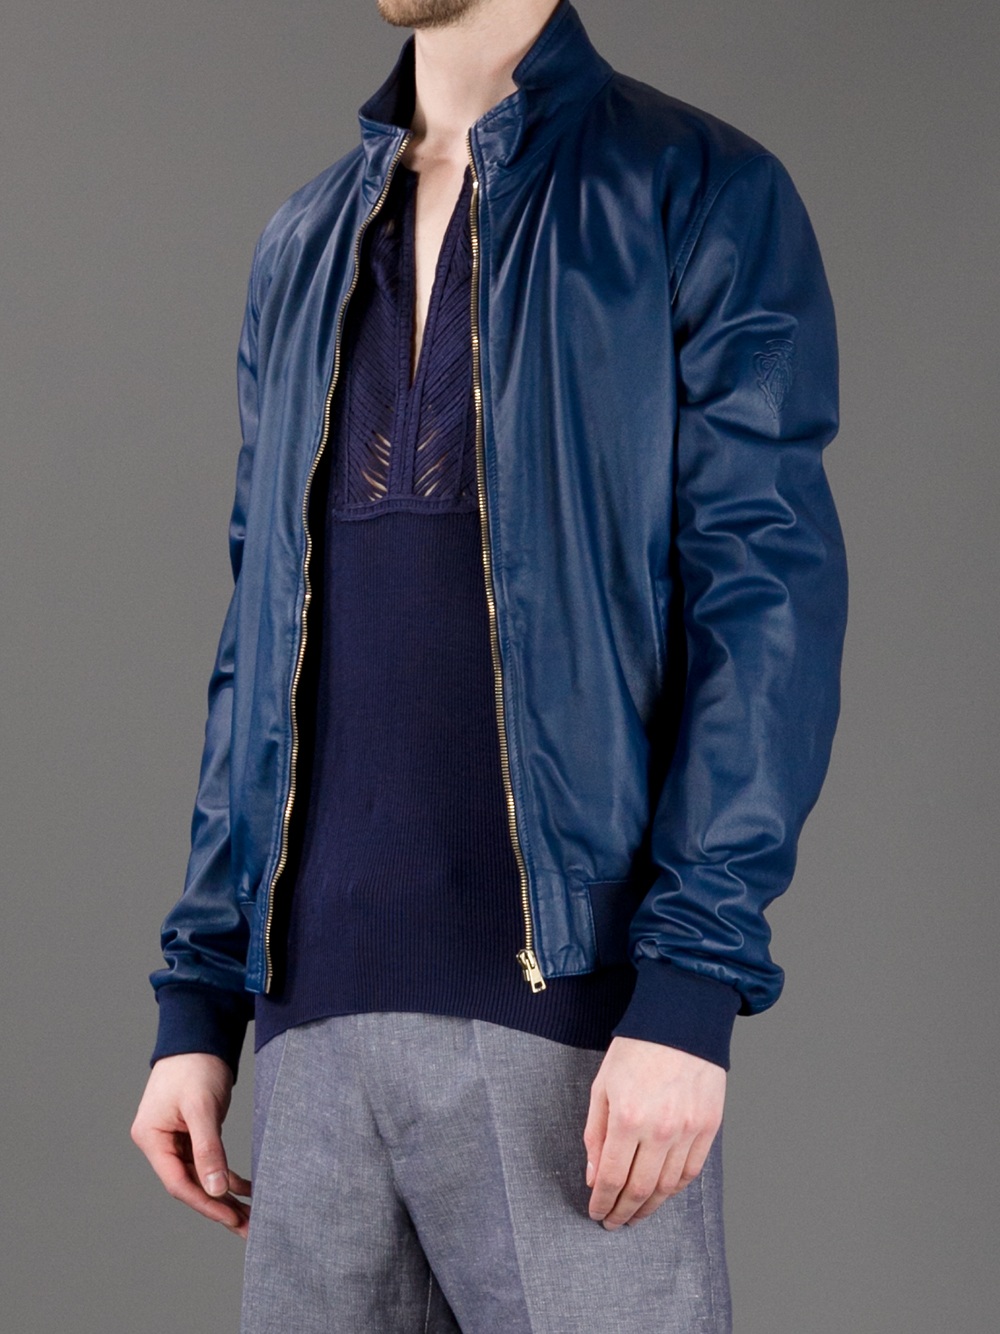 Gucci Leather Bomber Jacket in Blue for Men | Lyst